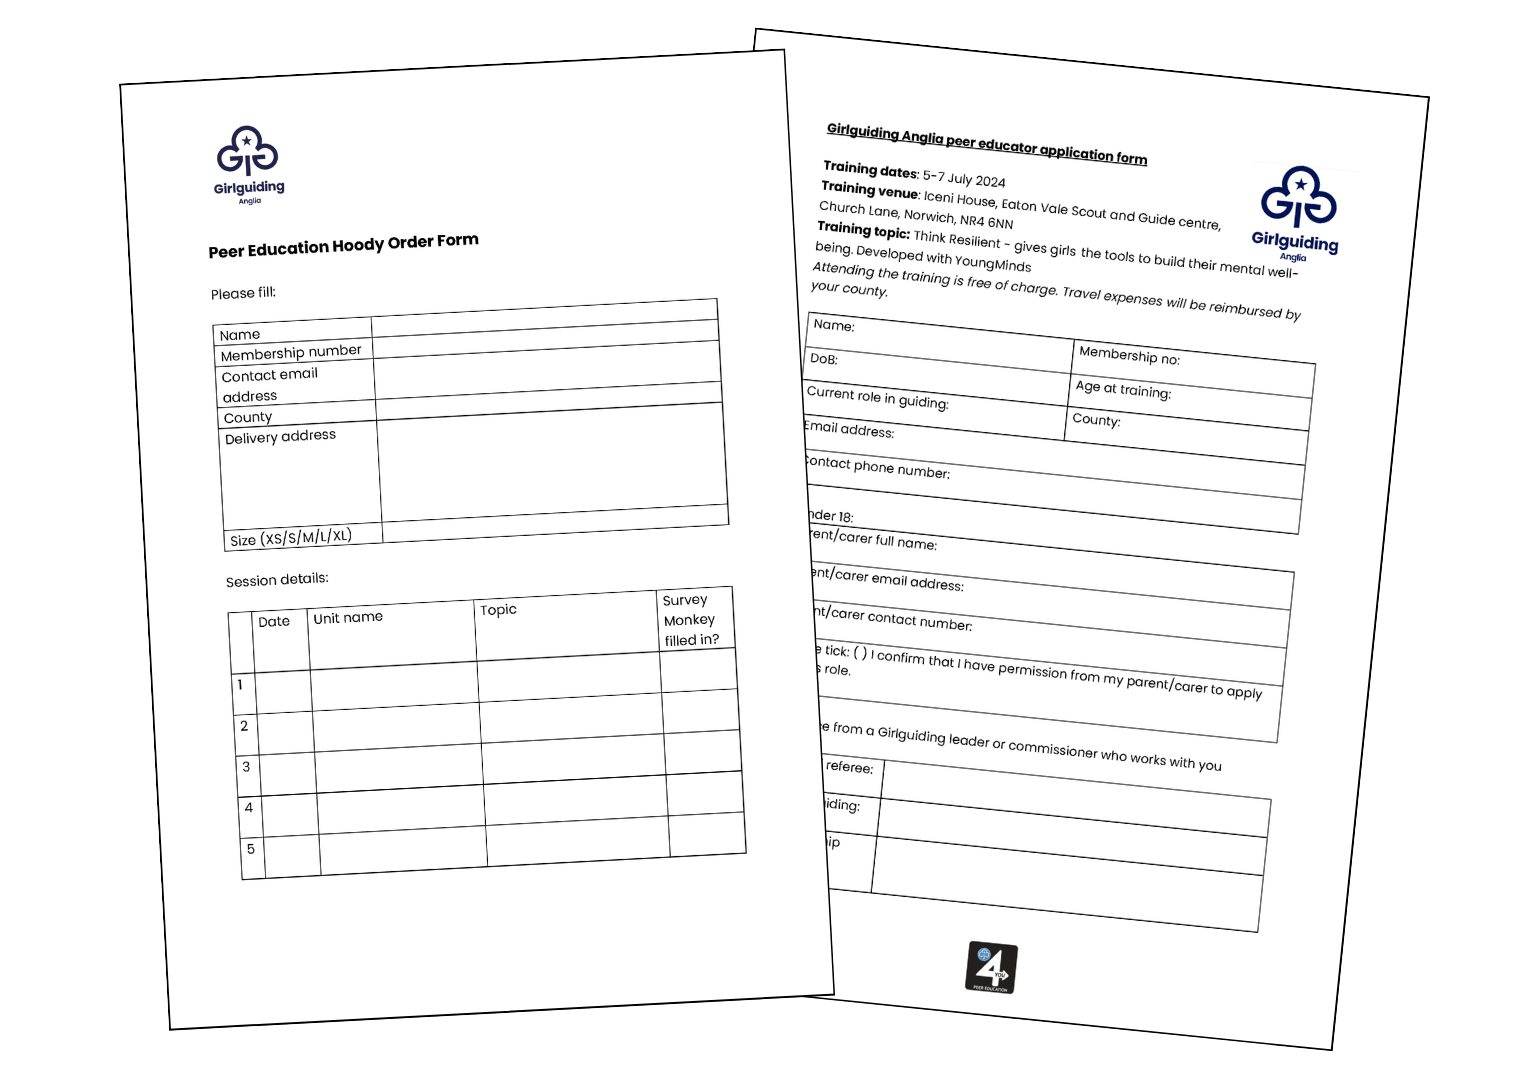 image relating to Peer education forms